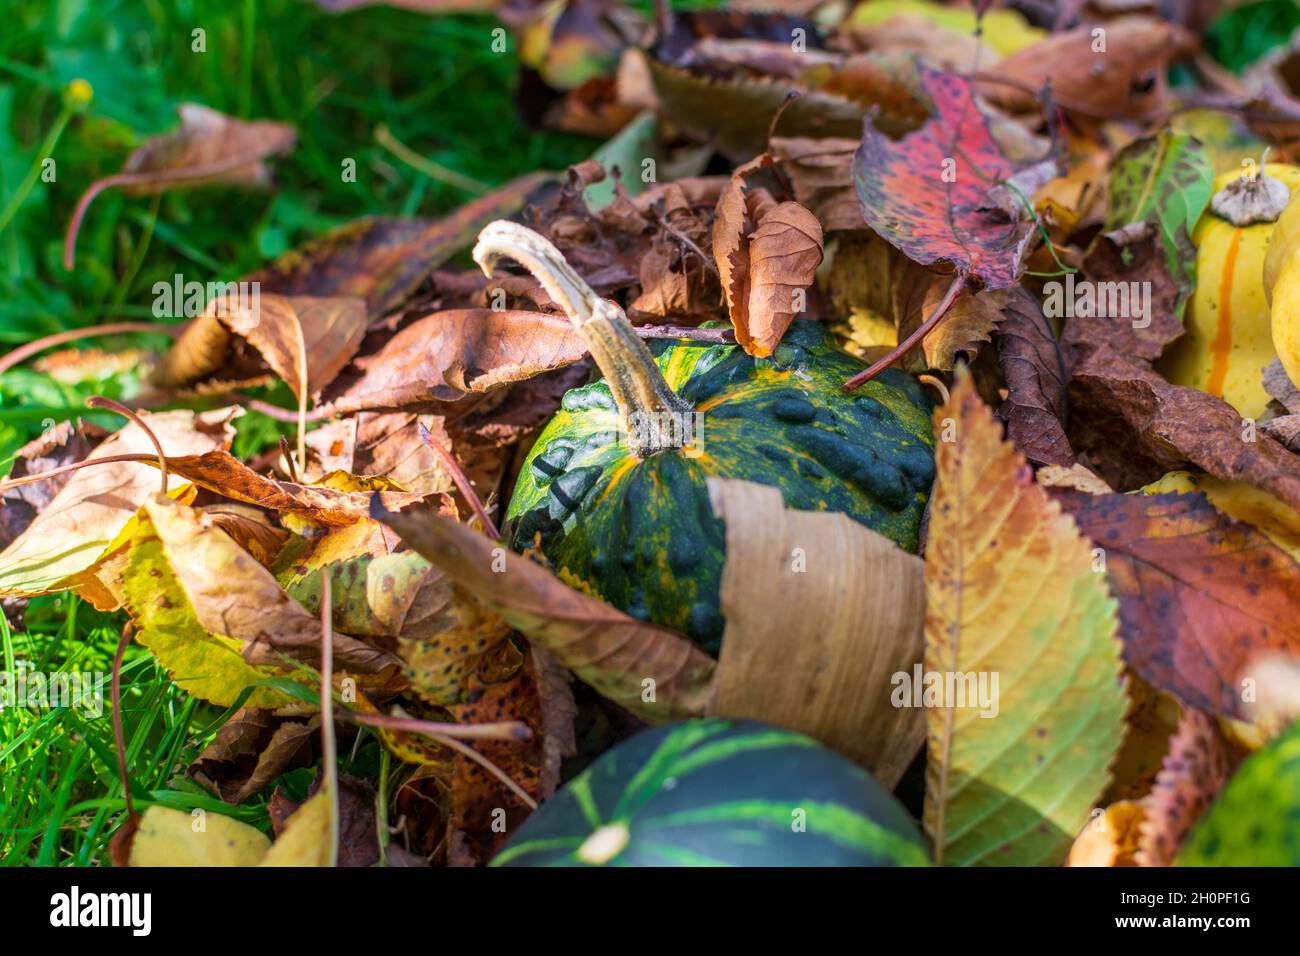 Green gourd or pumpkin covered by fall's colored leaves Stock Photo